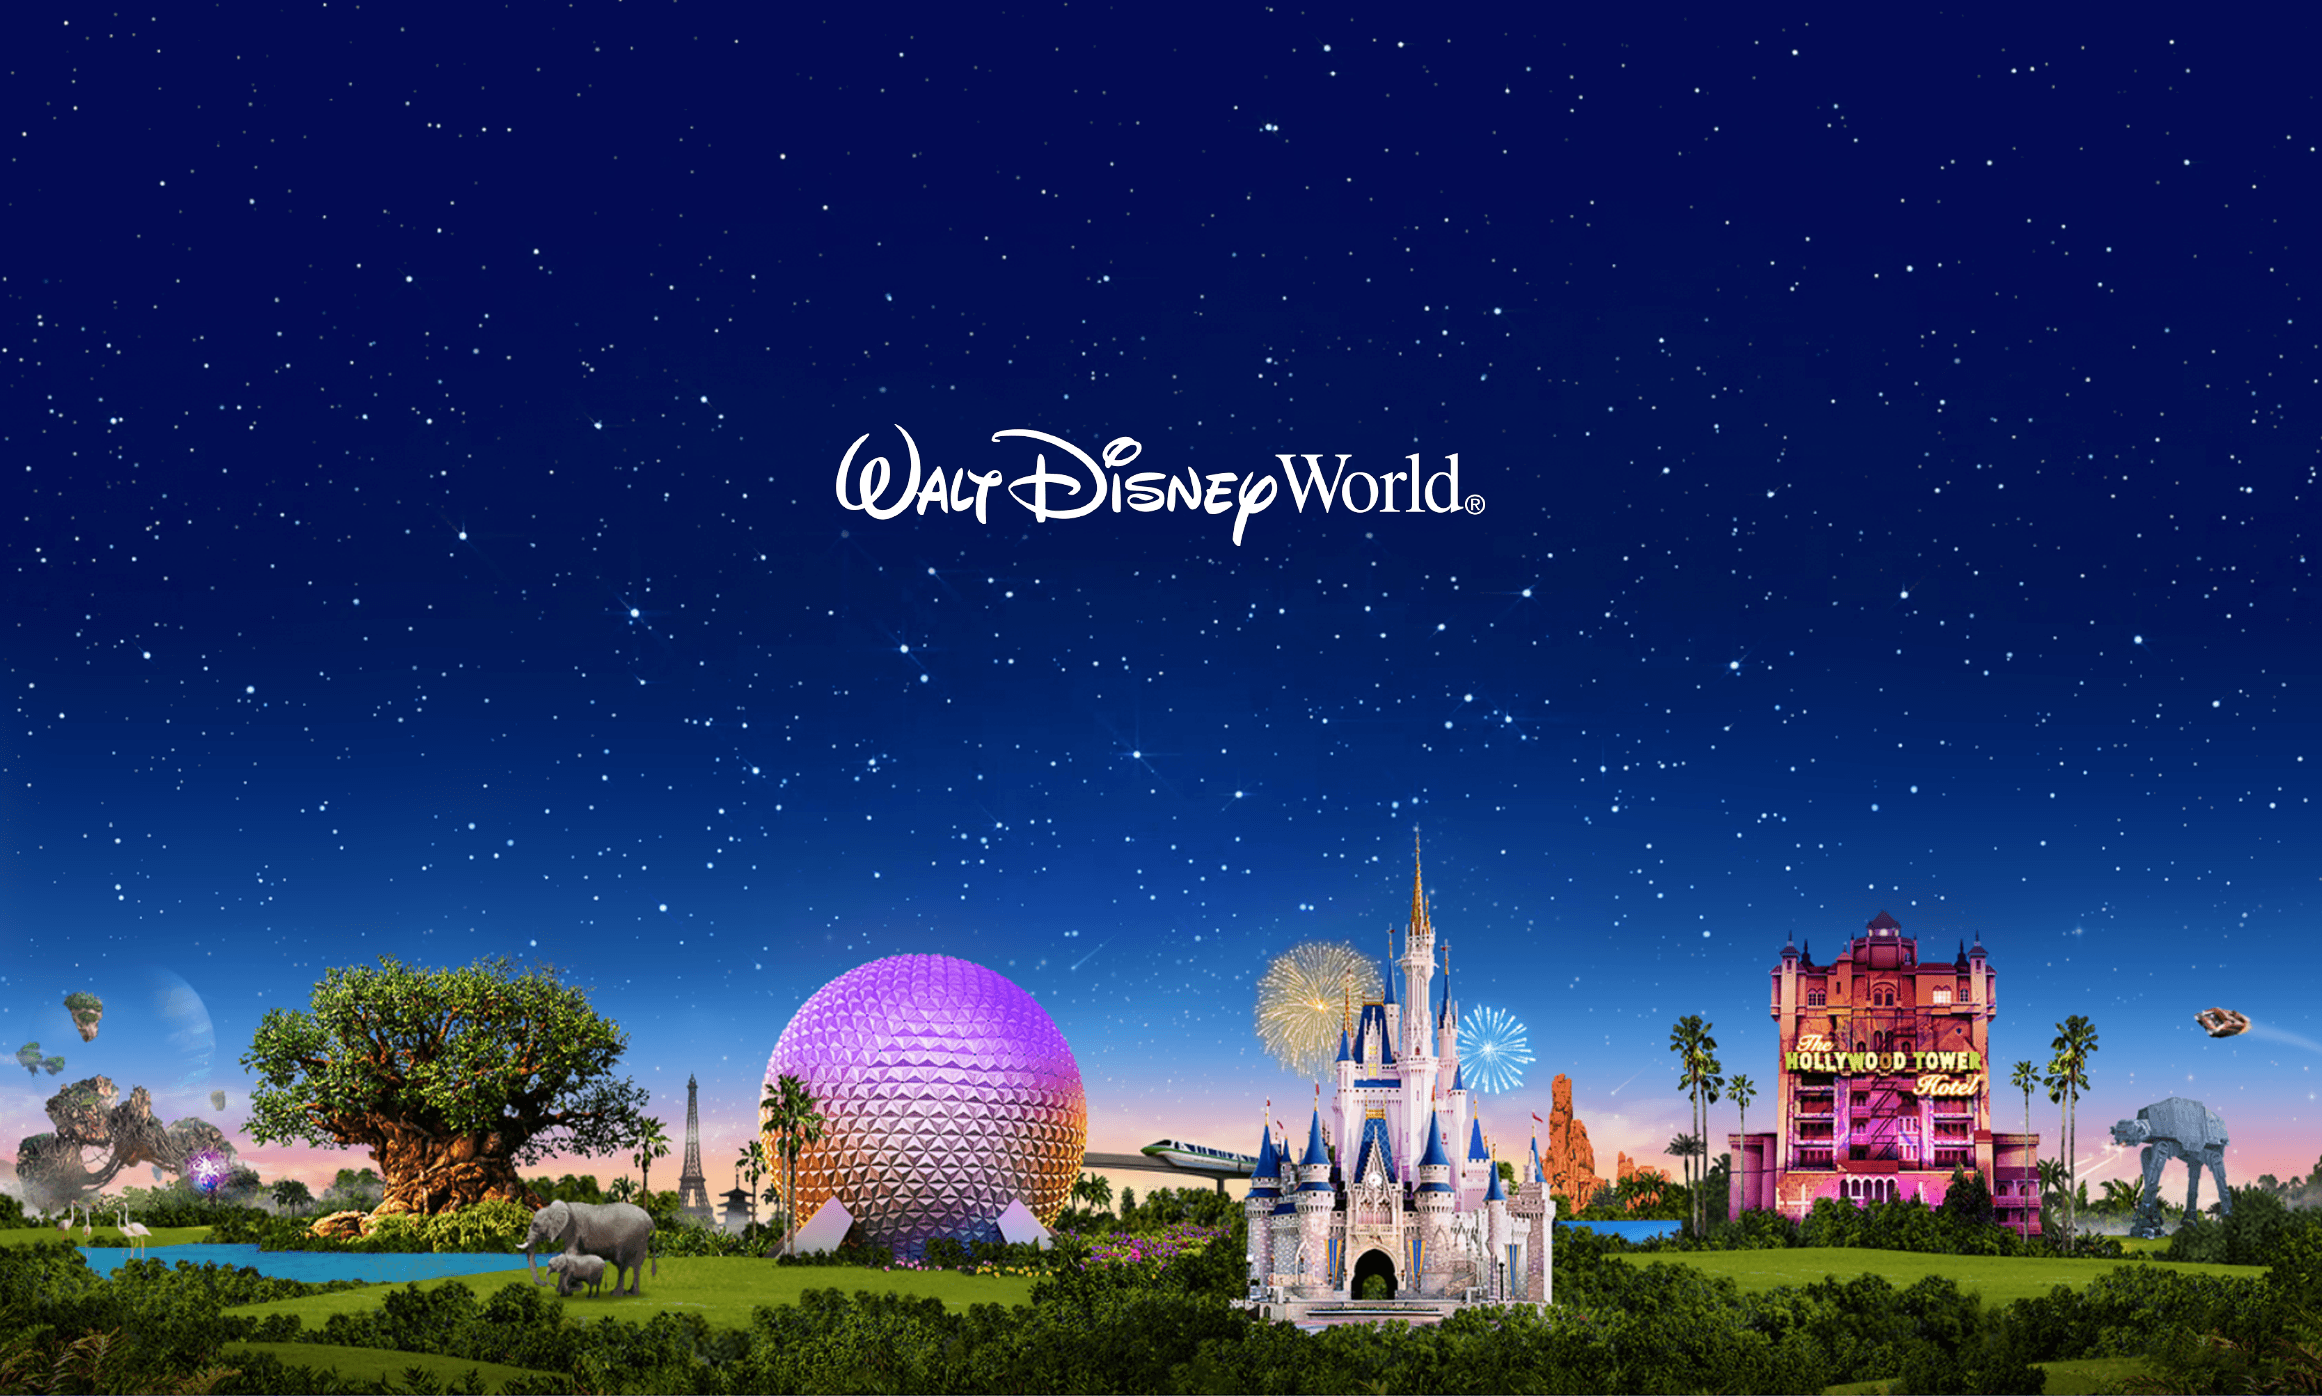 Upcoming Trip? Here is a Walt Disney World Desktop Wallpaper I made (Based on the My Disney Experience image)